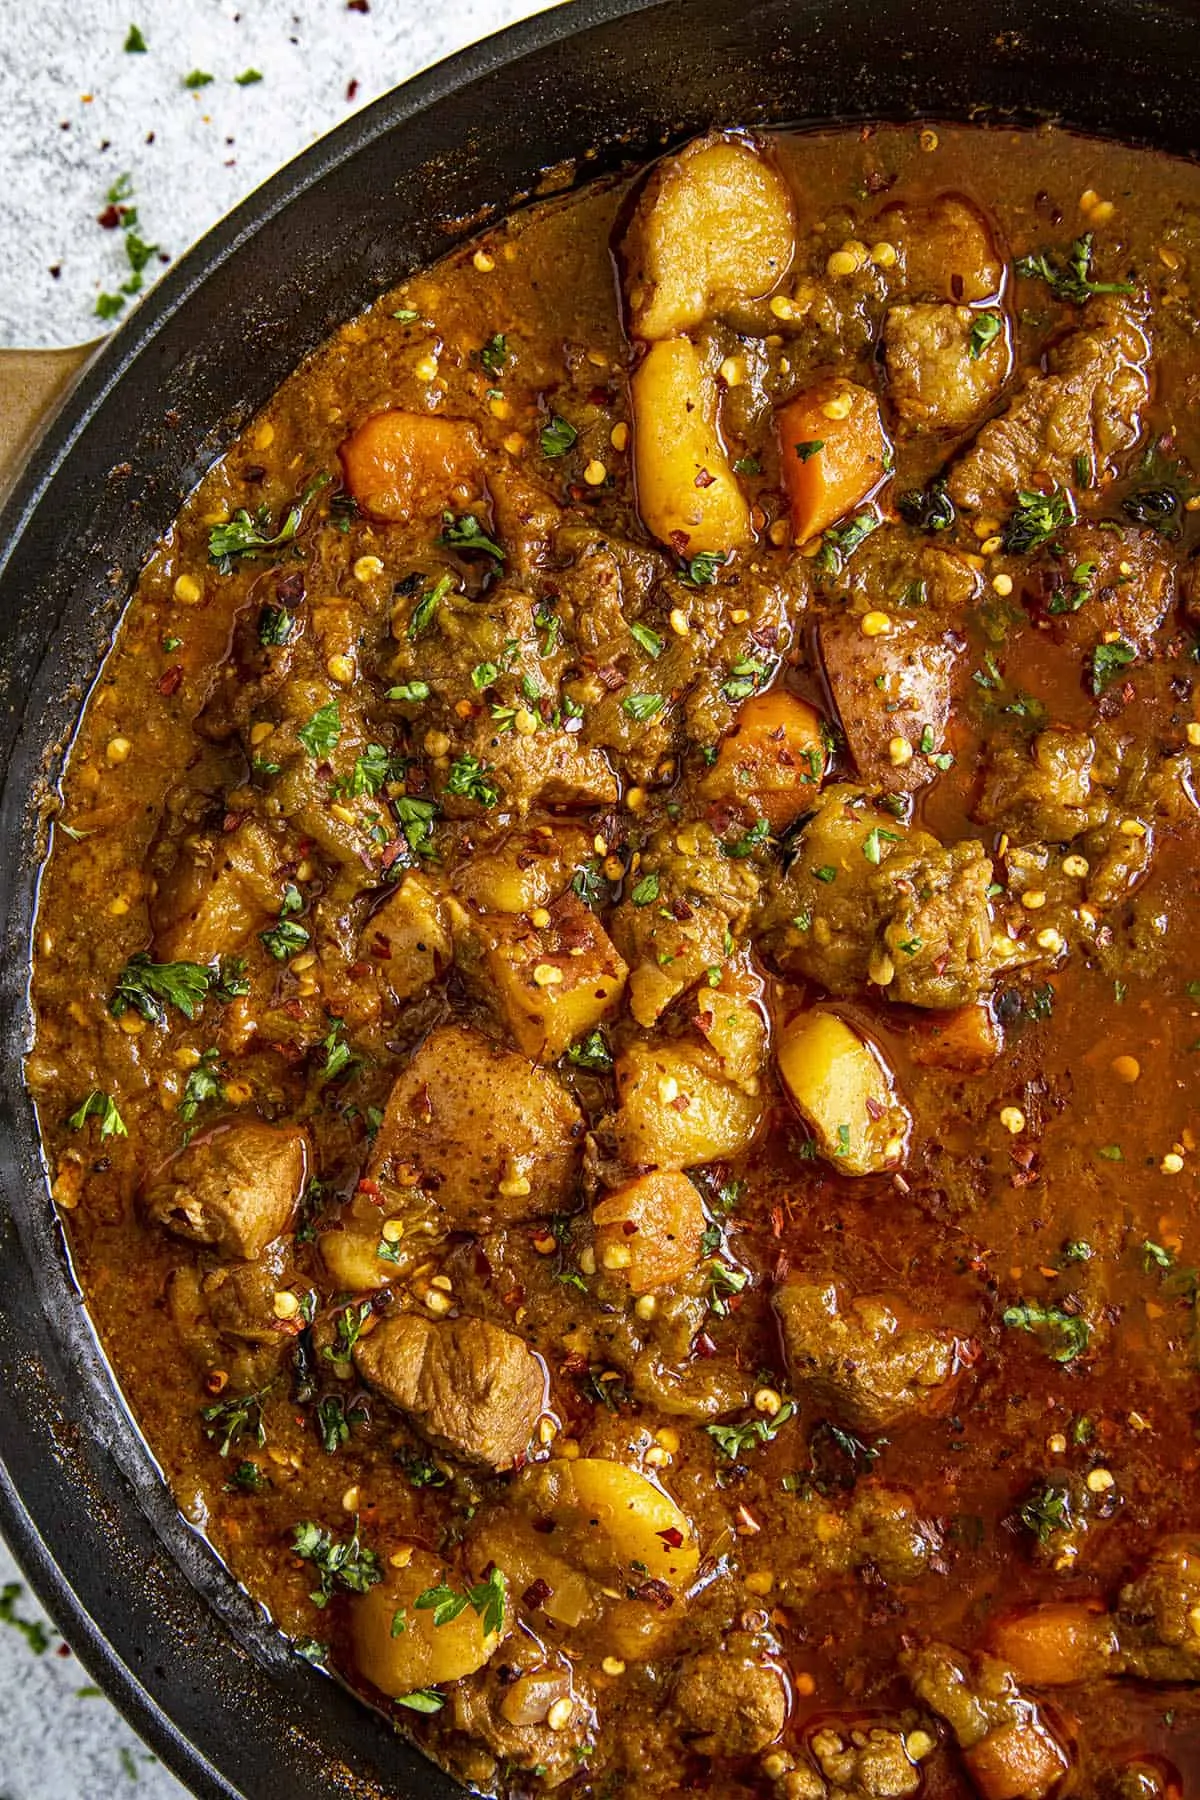 Chunky Green Chili Stew in a pot with lots of pork and potatoes